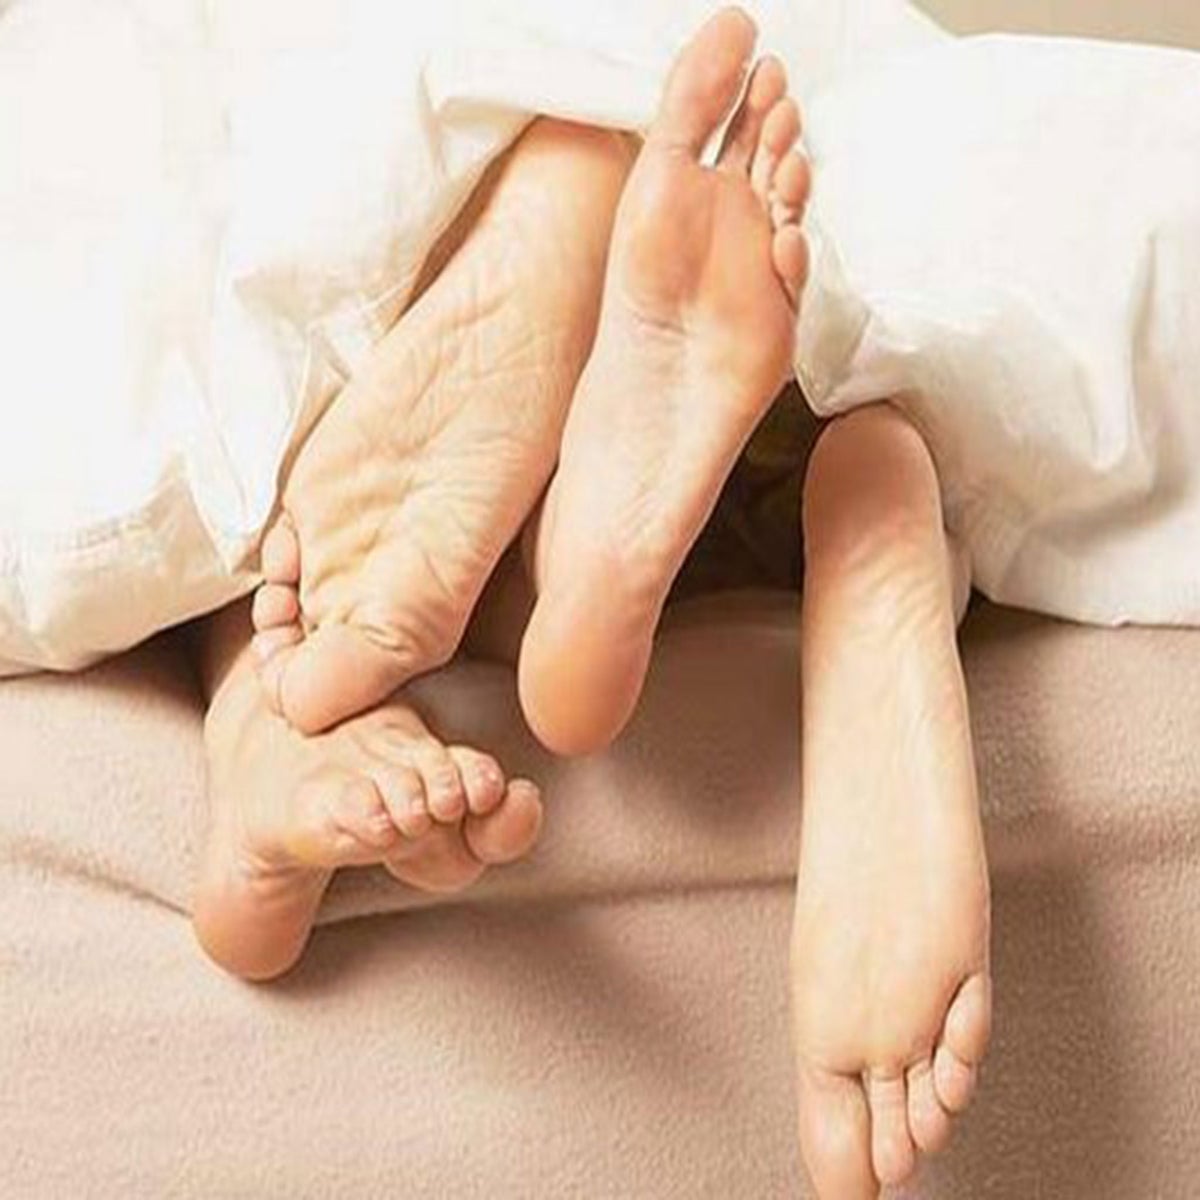 Barefoot Sex Submission - British sex survey 2014: Over three-quarters of men watch porn, but women  prefer erotica | The Independent | The Independent